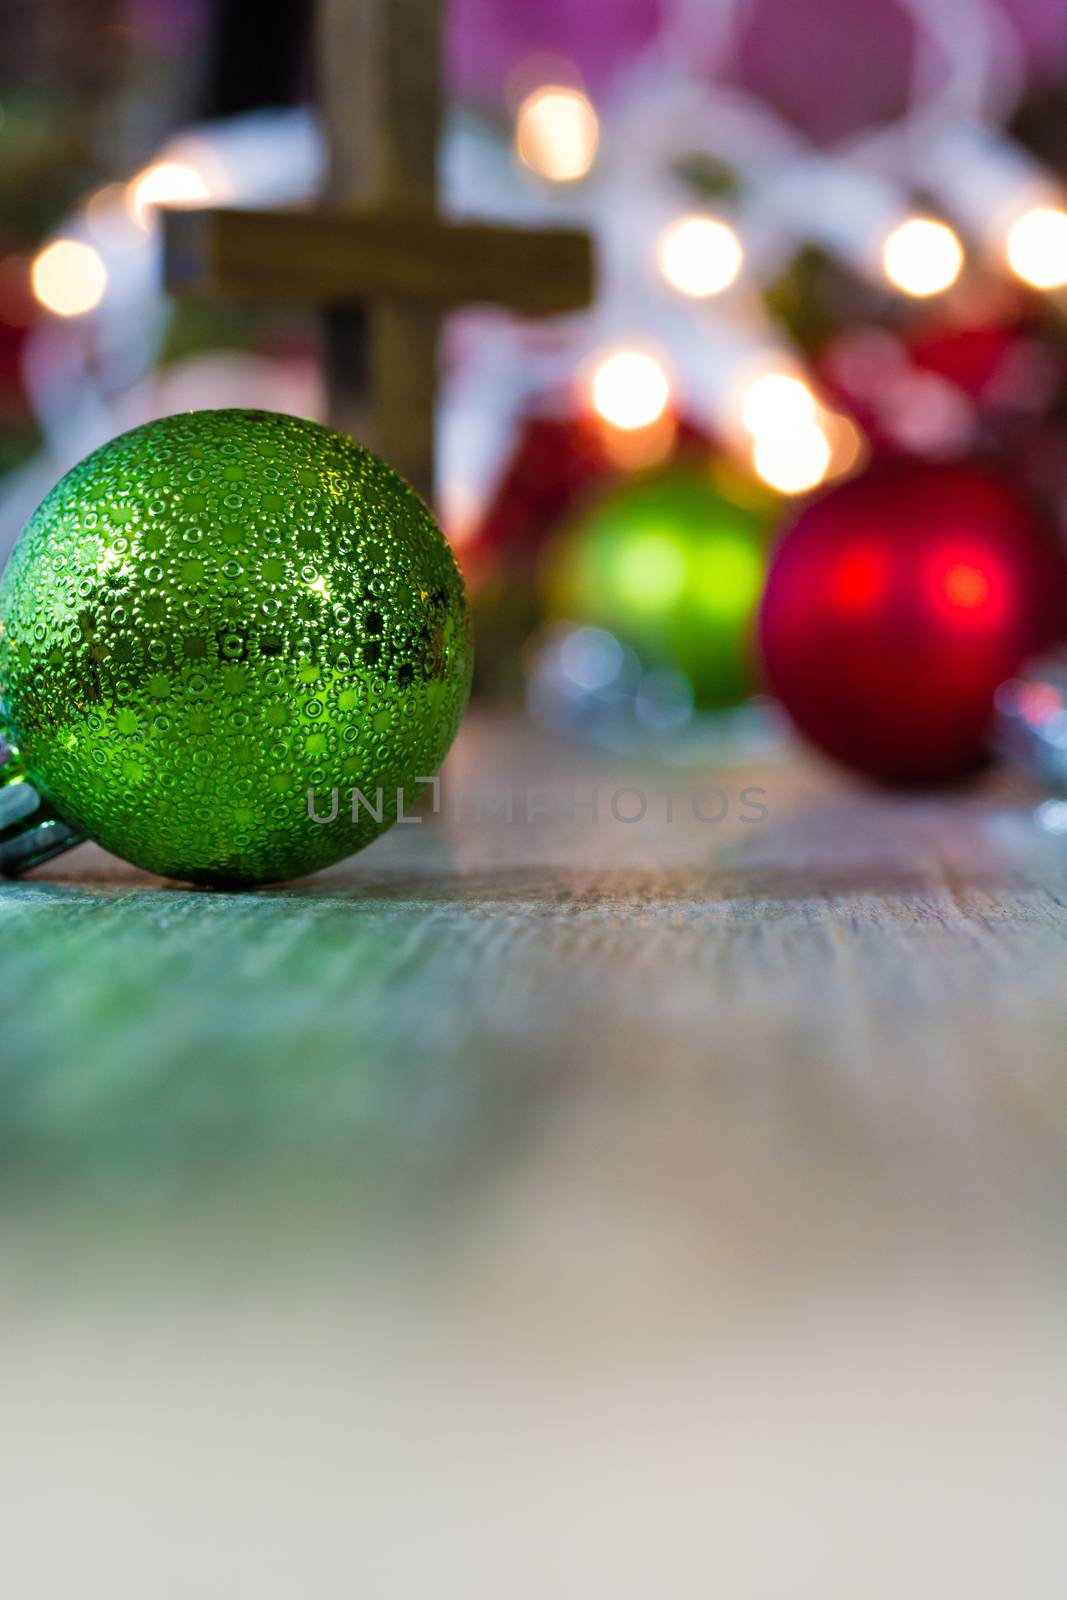 Colorful Christmas ornaments and lights on a wooden background with a christian cross.